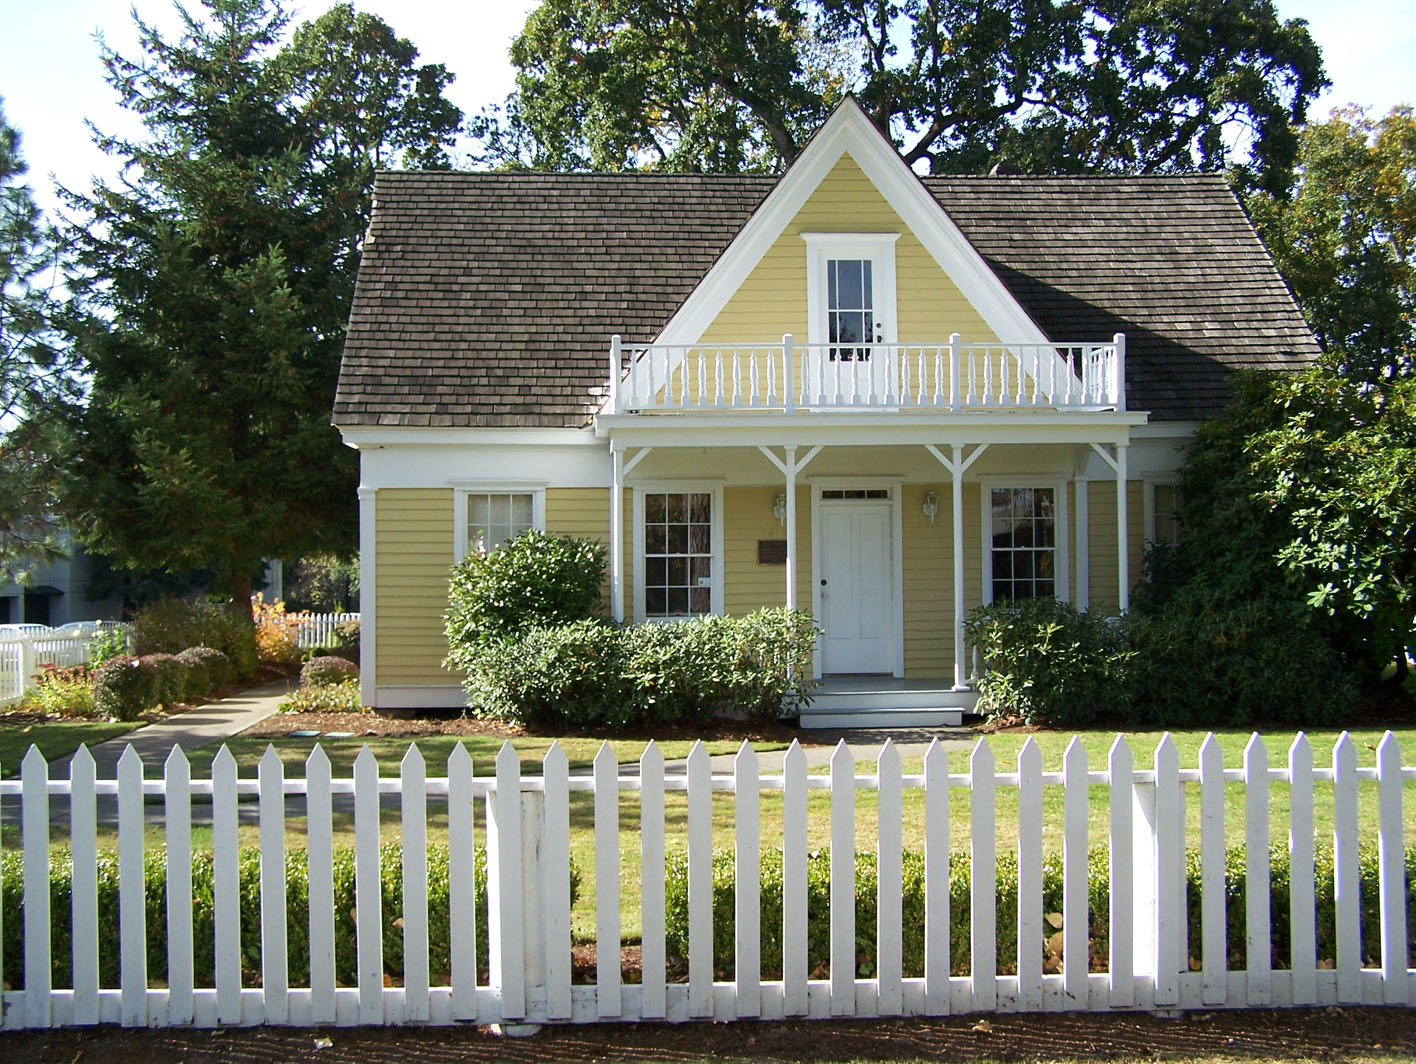 Living the American Dream with a White Picket Fence!
